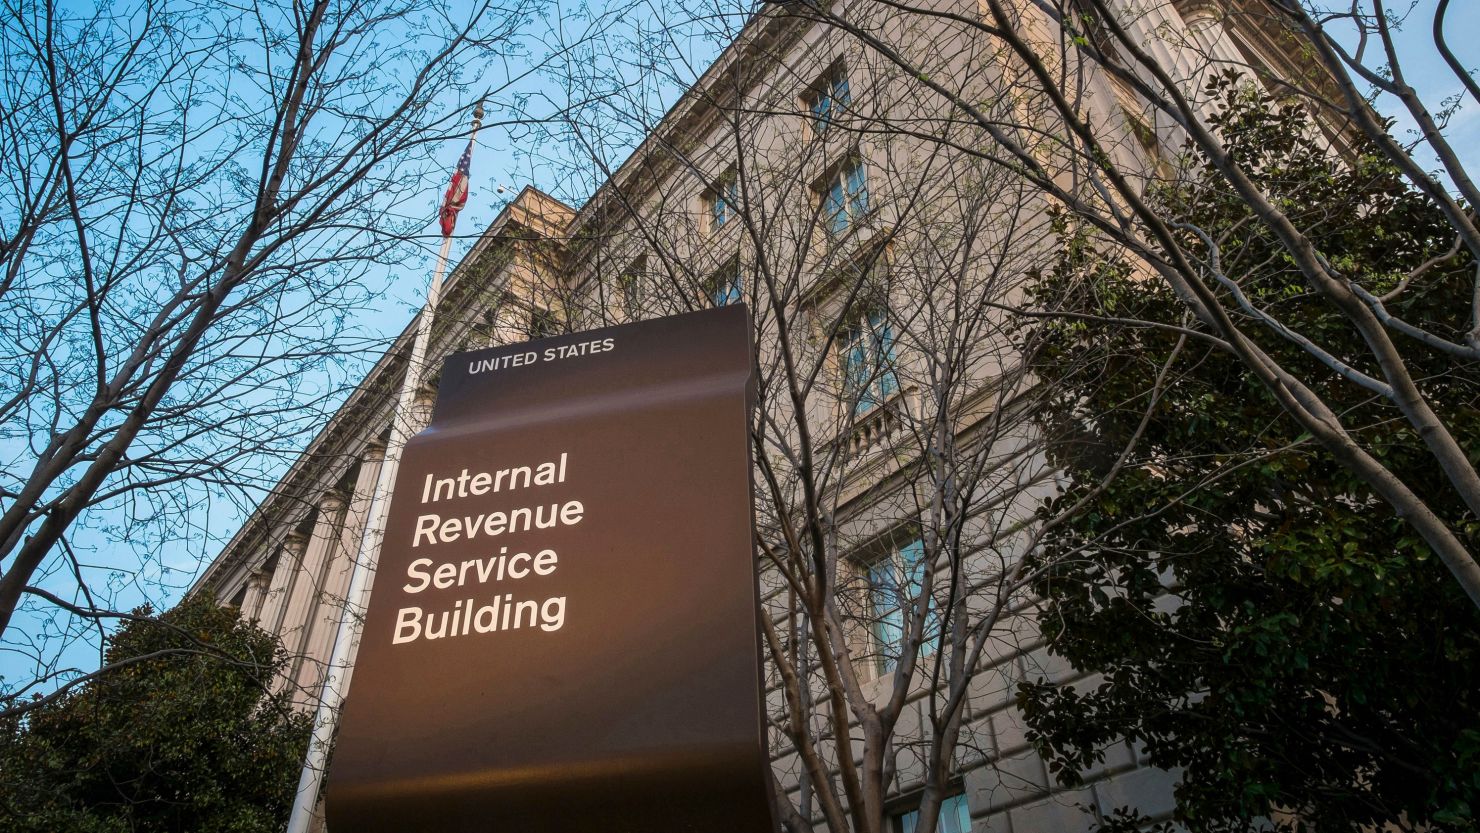 FILE - This April 13, 2014, file photo shows the Internal Revenue Service (IRS) headquarters building in Washington. For small-business owners, preparing an income tax return is far from simple, which can increase the chances of making a mistake. According to two small-business pros, if you catch an error after you've filed your small-business tax return, the first thing to do is confirm there's really an error on the return and make sure to stay calm.  (AP Photo/J. David Ake, File)